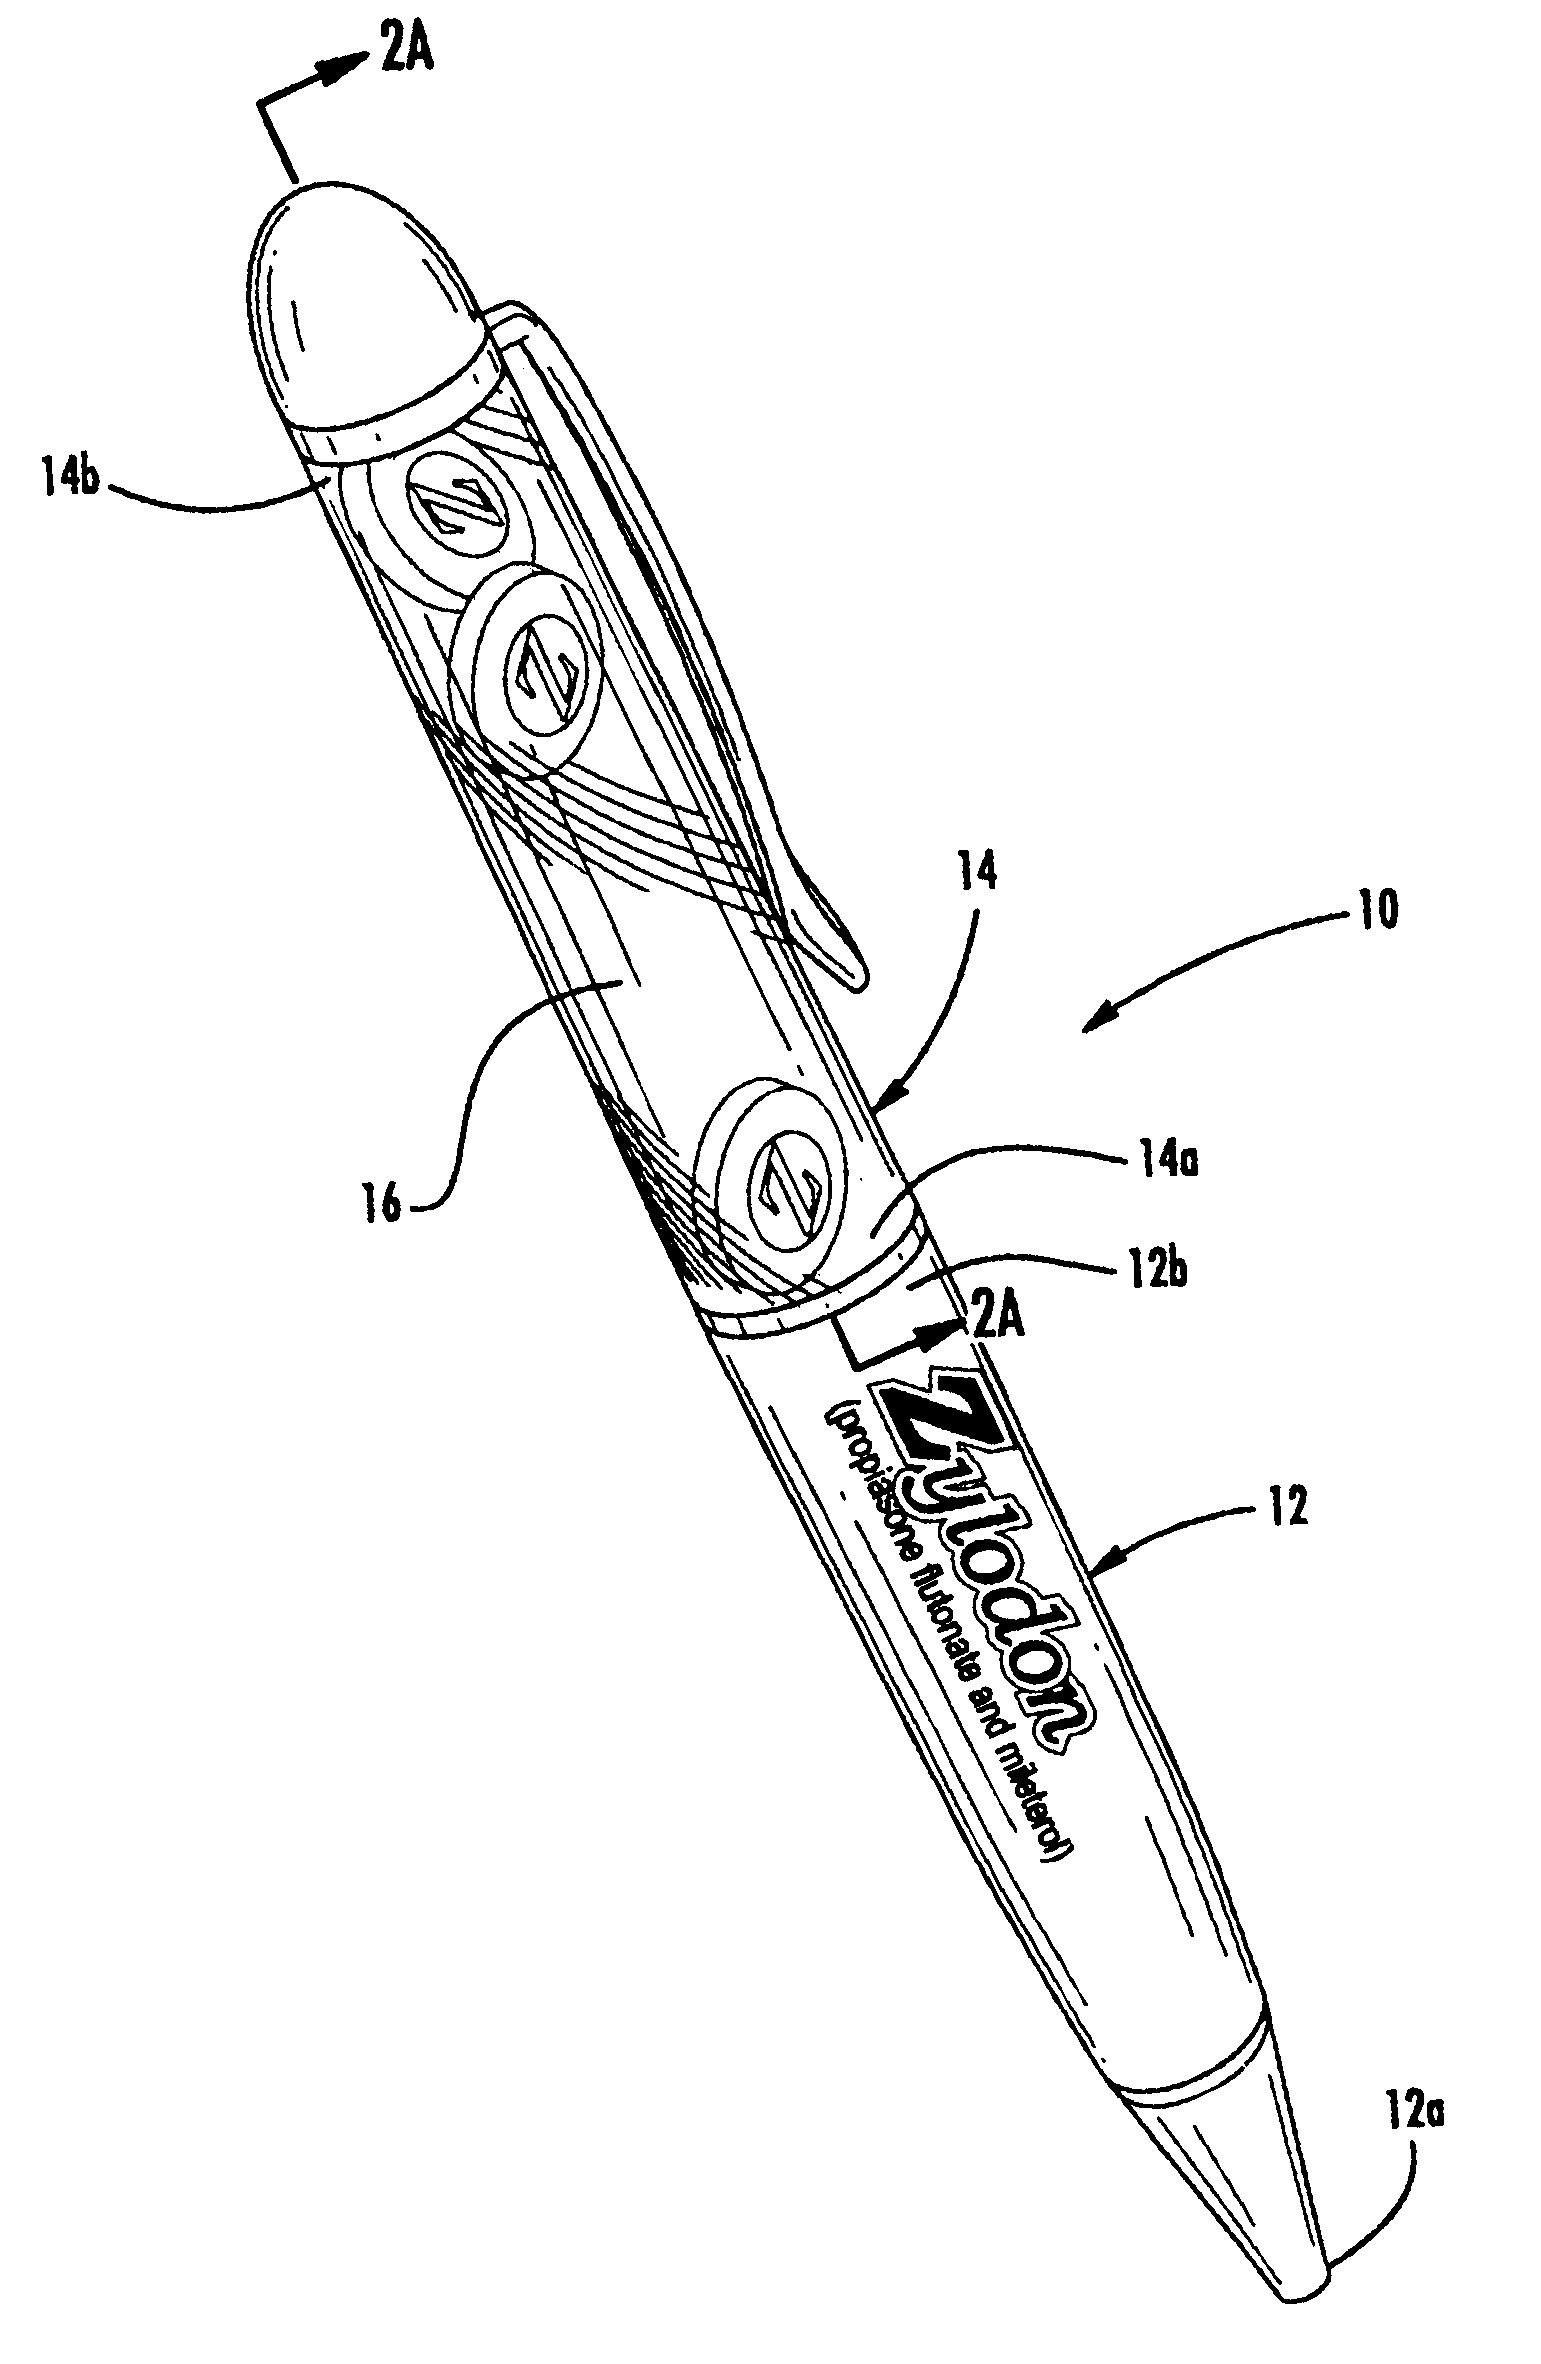 Writing instrument with fluid-containing barrel